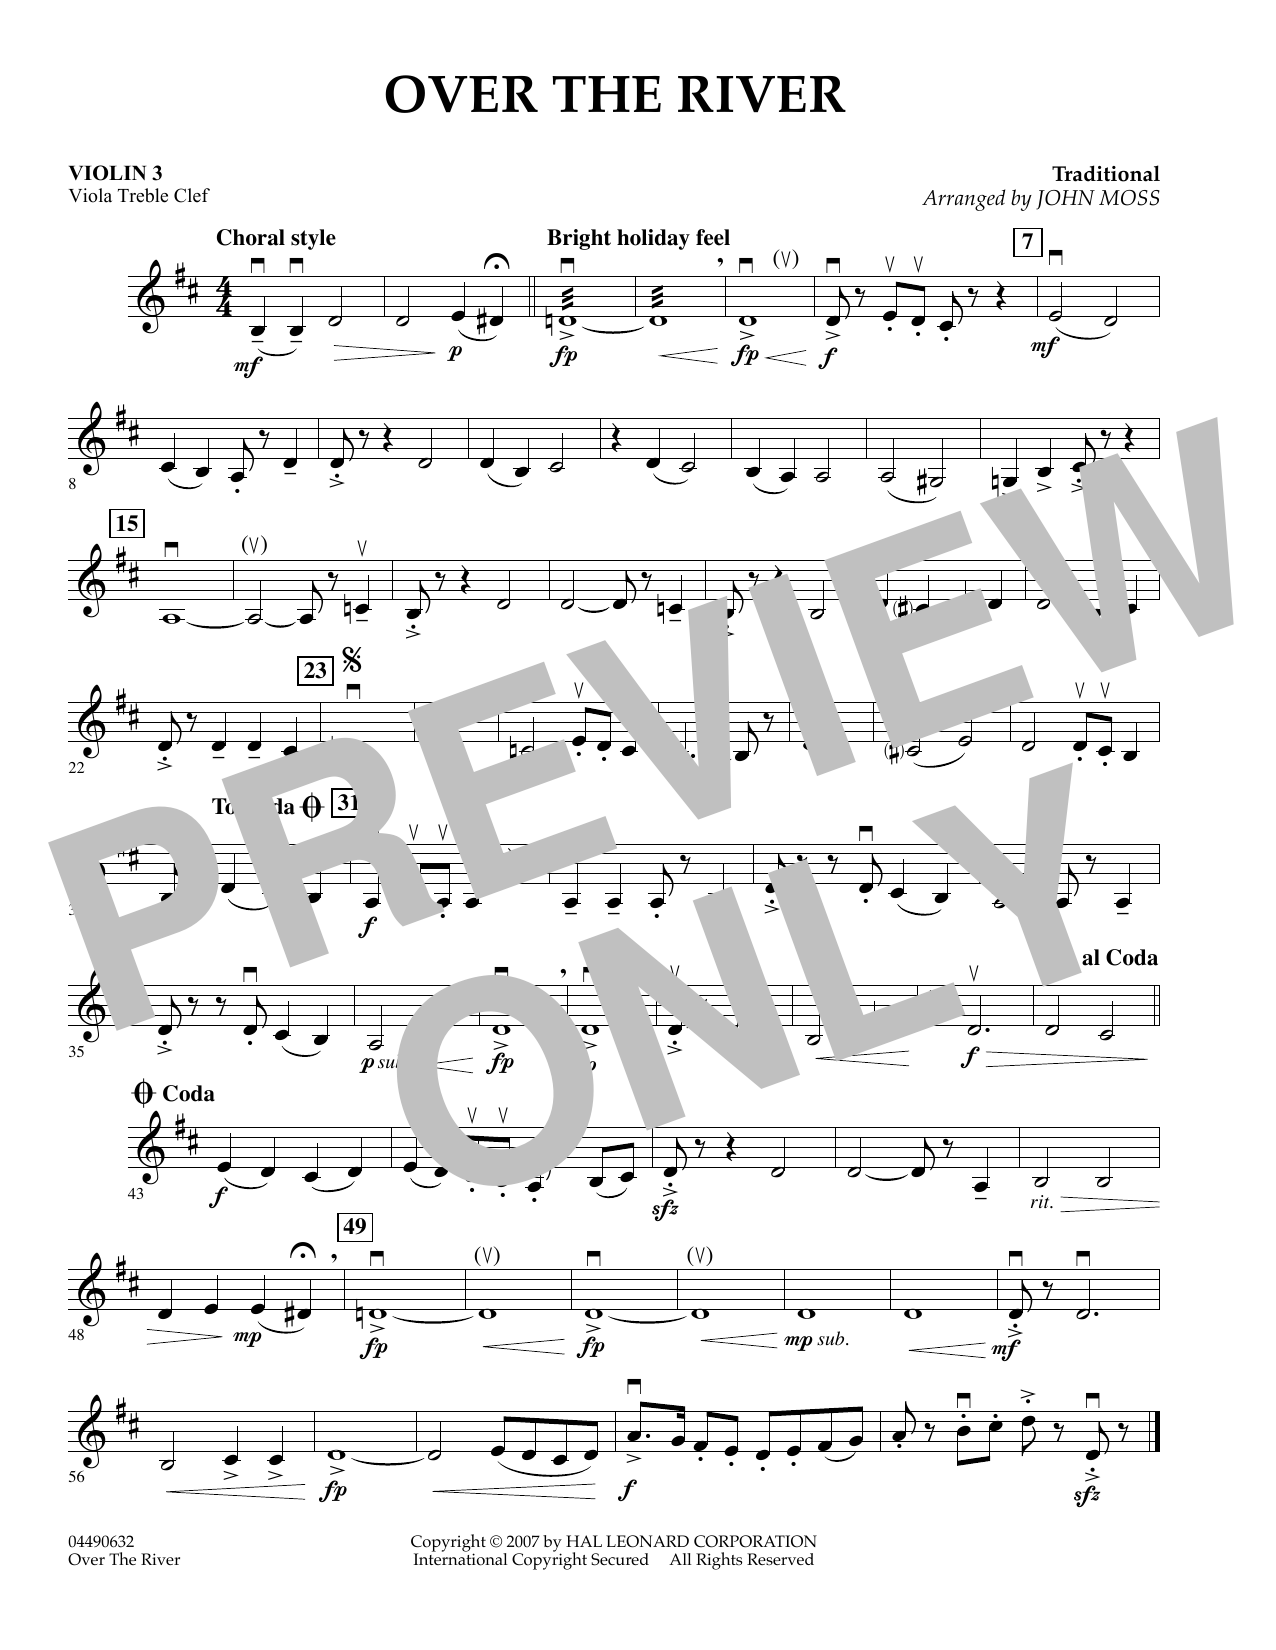 John Moss Over The River - Violin 3 (Viola Treble Clef) sheet music preview music notes and score for Orchestra including 1 page(s)